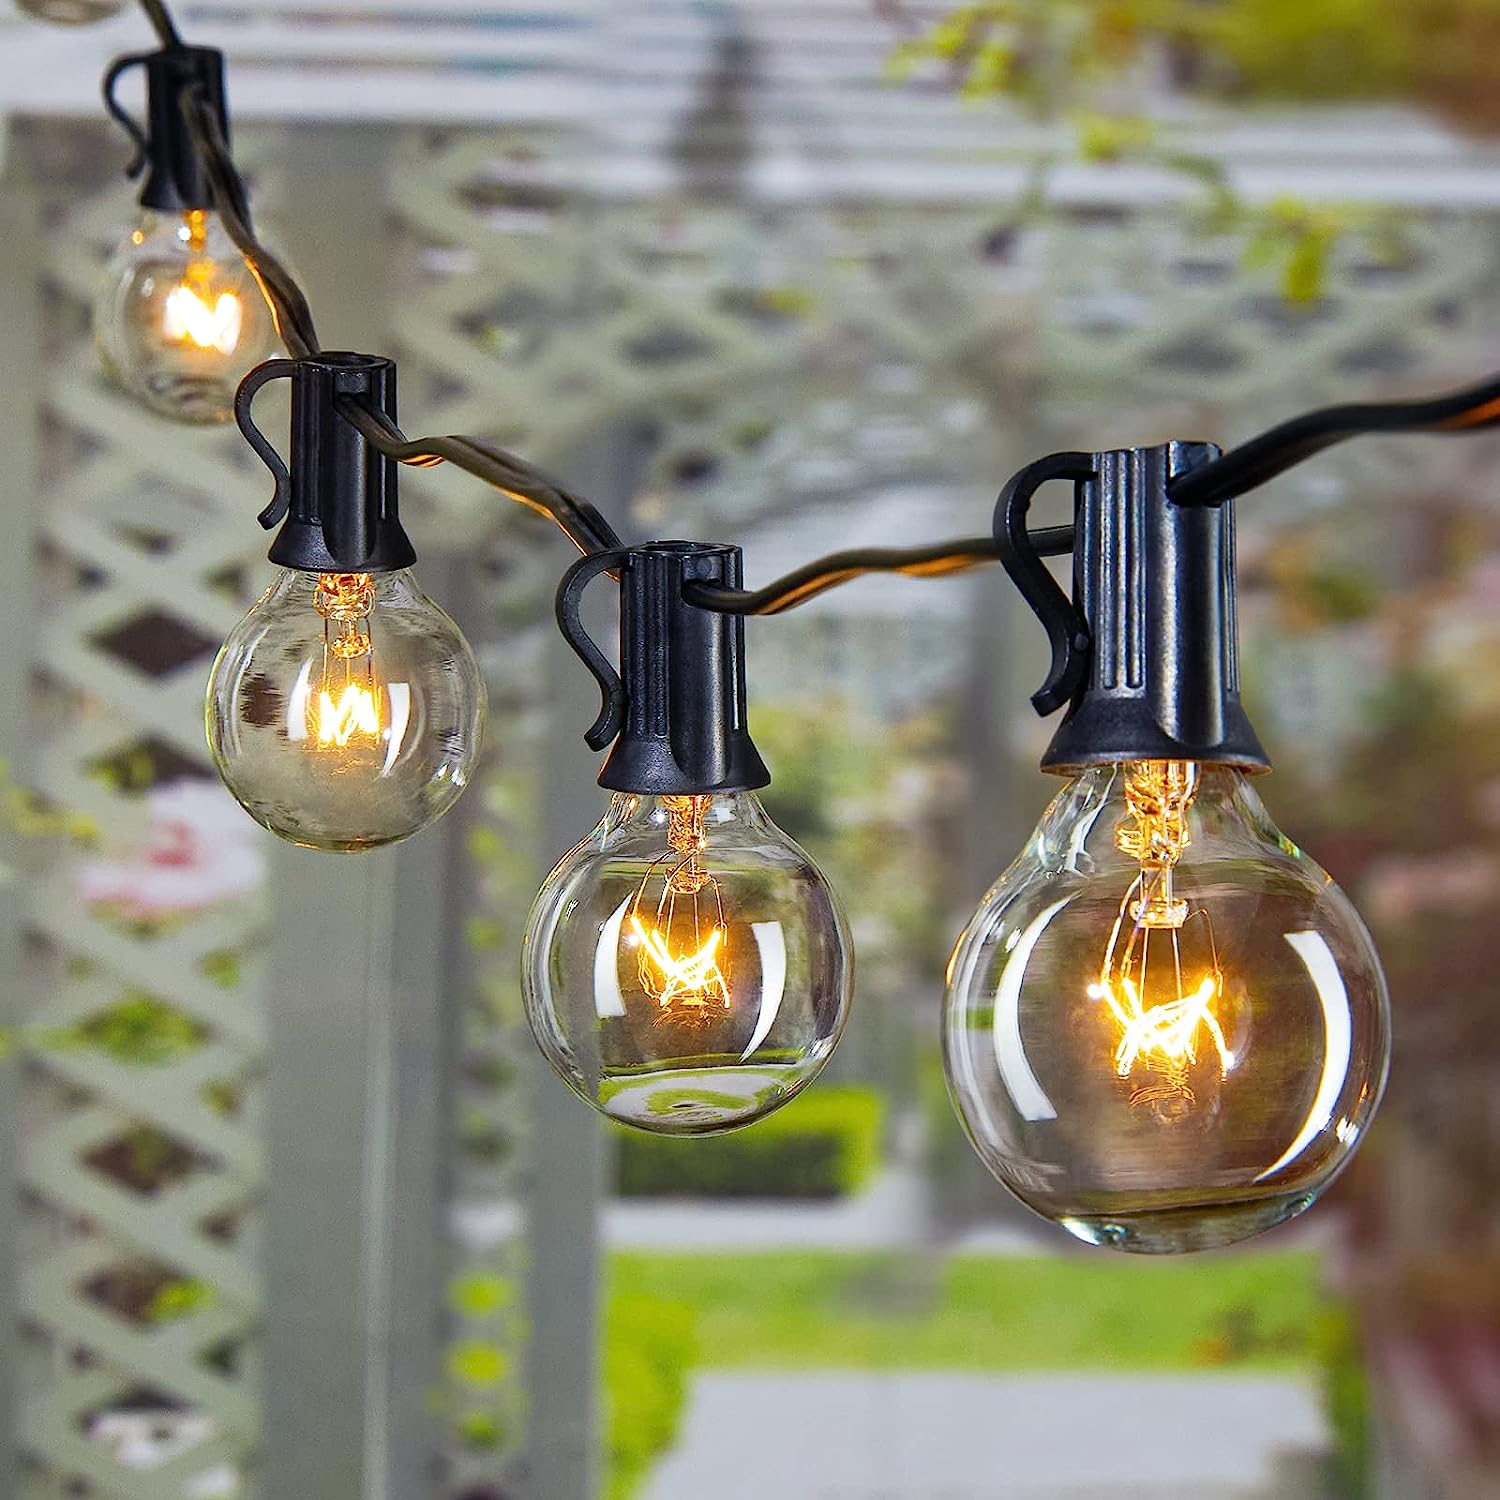 close up on bulbs of string lights in garden